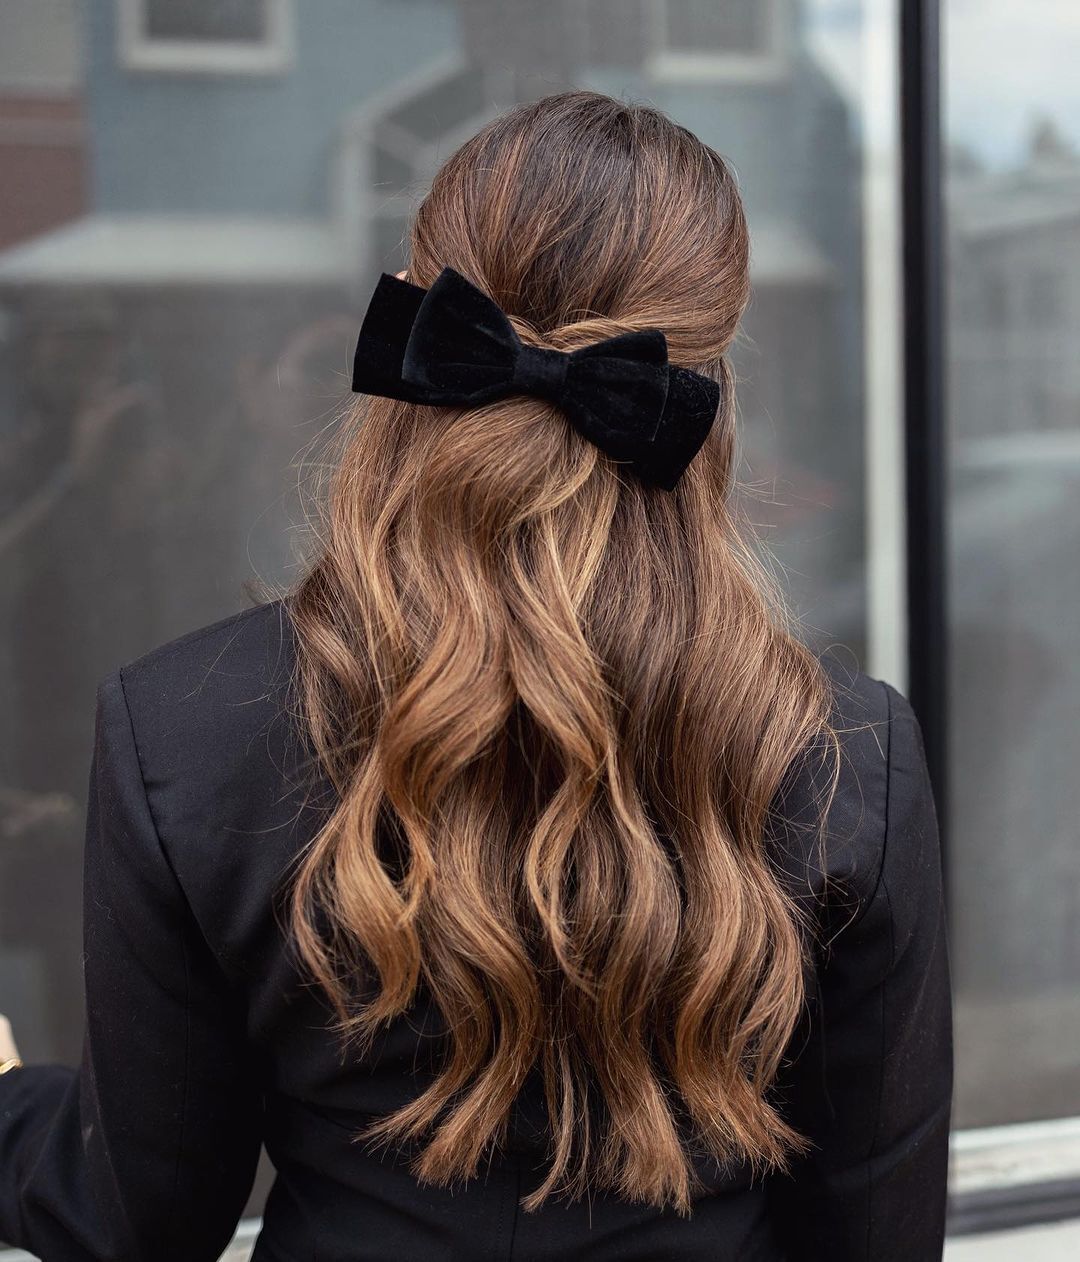 Hairstyle with a velvet bow